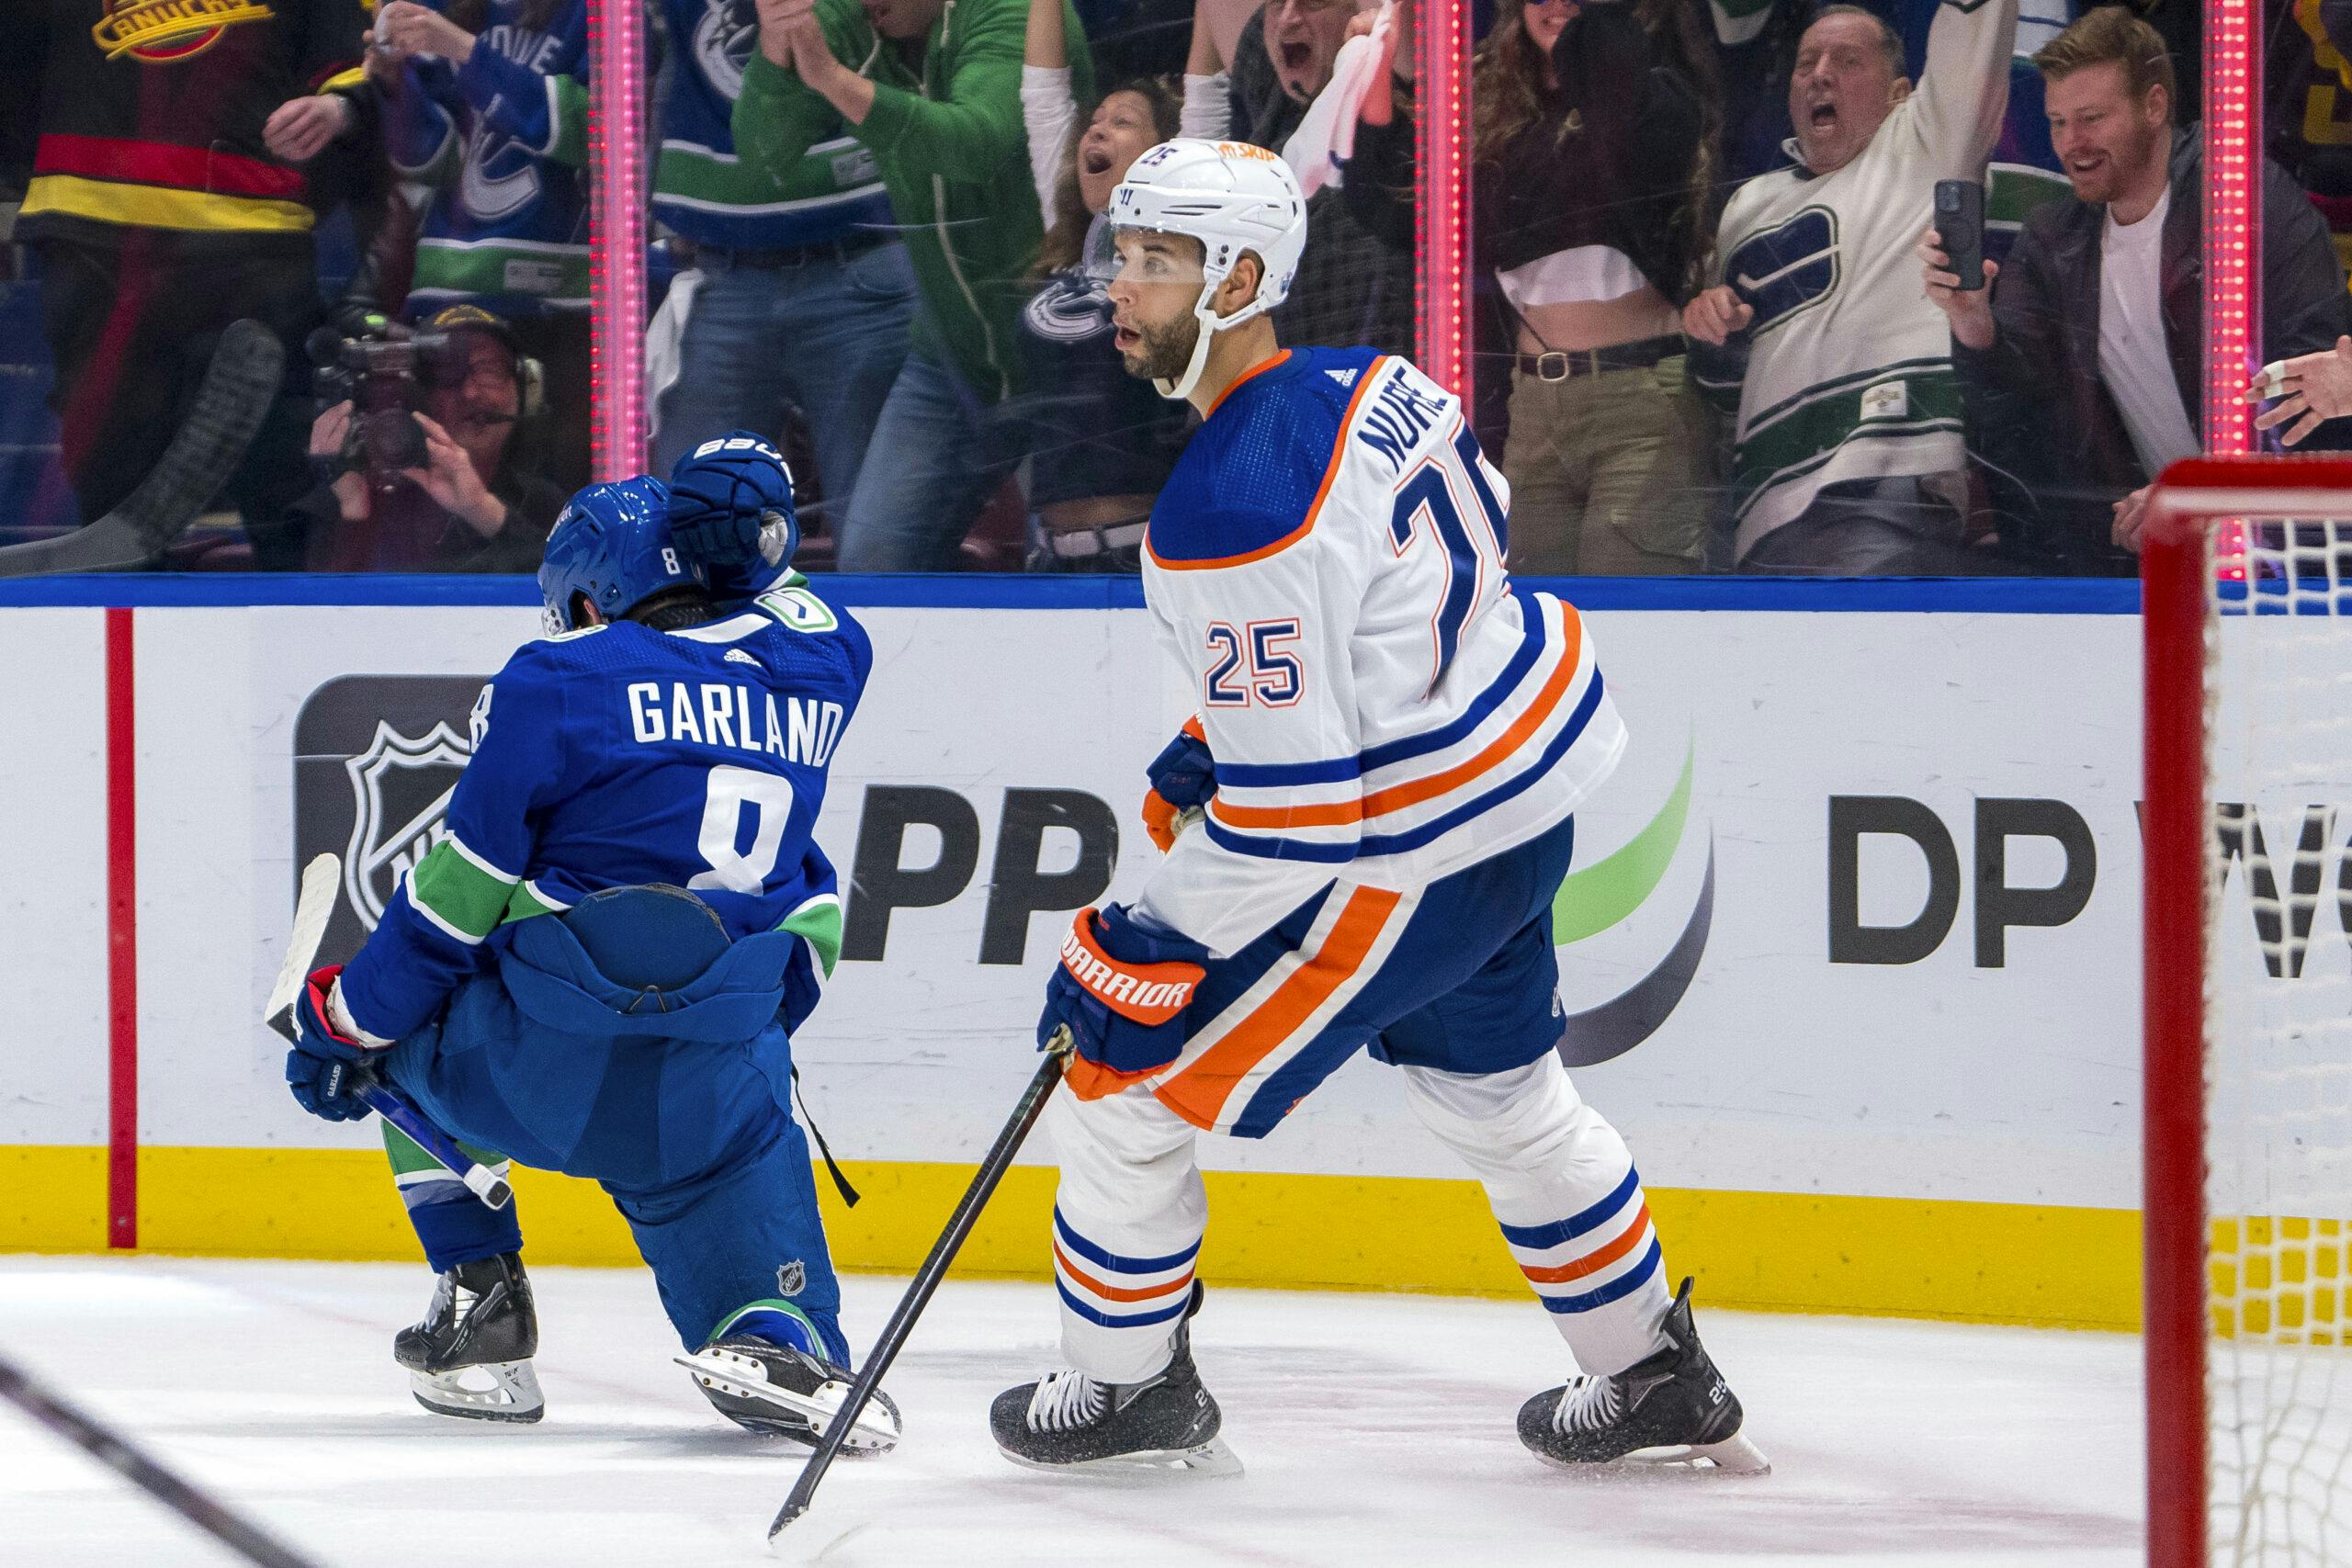 NHL betting preview for tonight's Game 2, all-Canadian matchup between the Vancouver Canucks and Edmonton Oilers